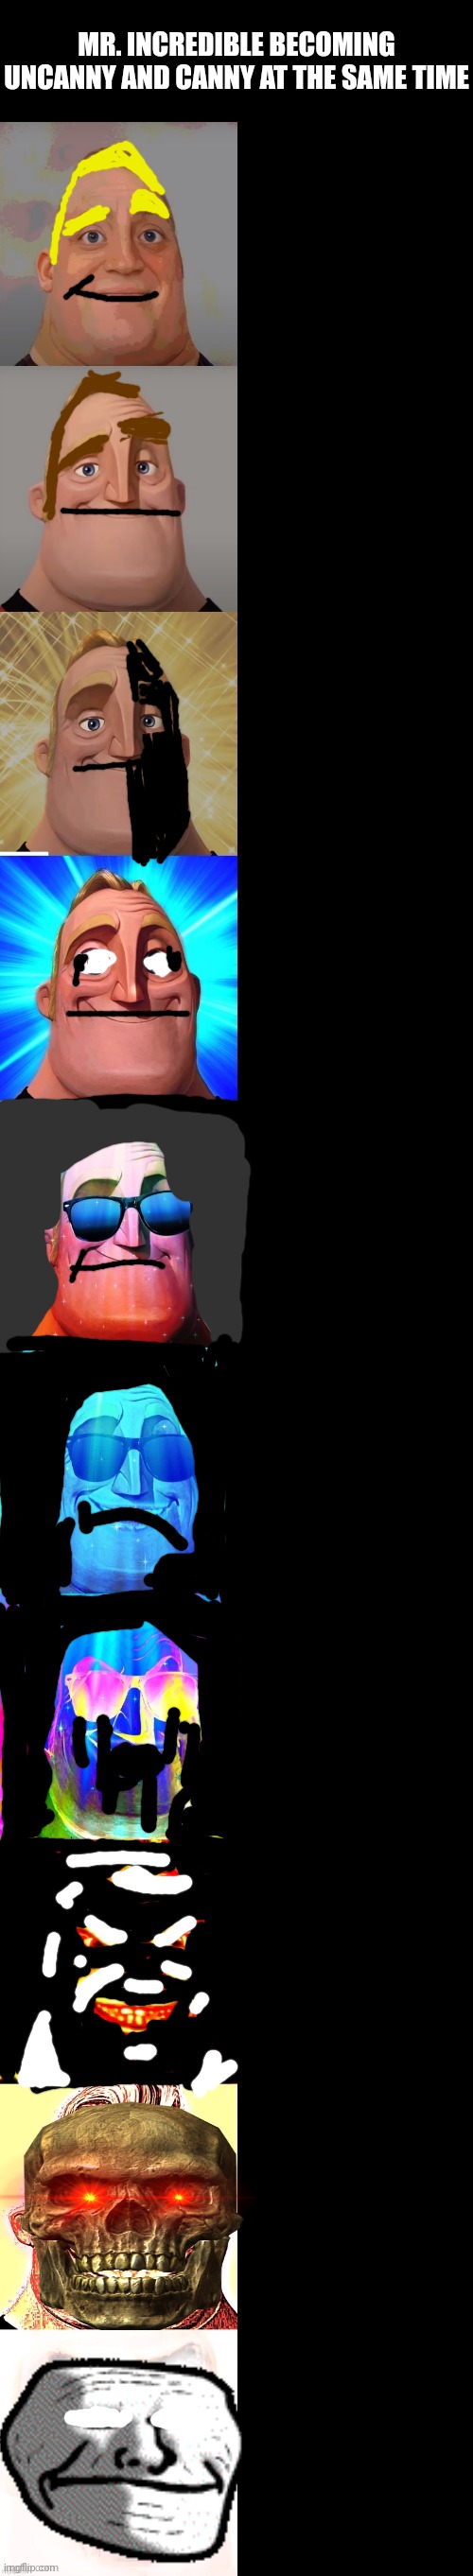 mr incredible becoming canny | MR. INCREDIBLE BECOMING UNCANNY AND CANNY AT THE SAME TIME | image tagged in mr incredible becoming canny | made w/ Imgflip meme maker